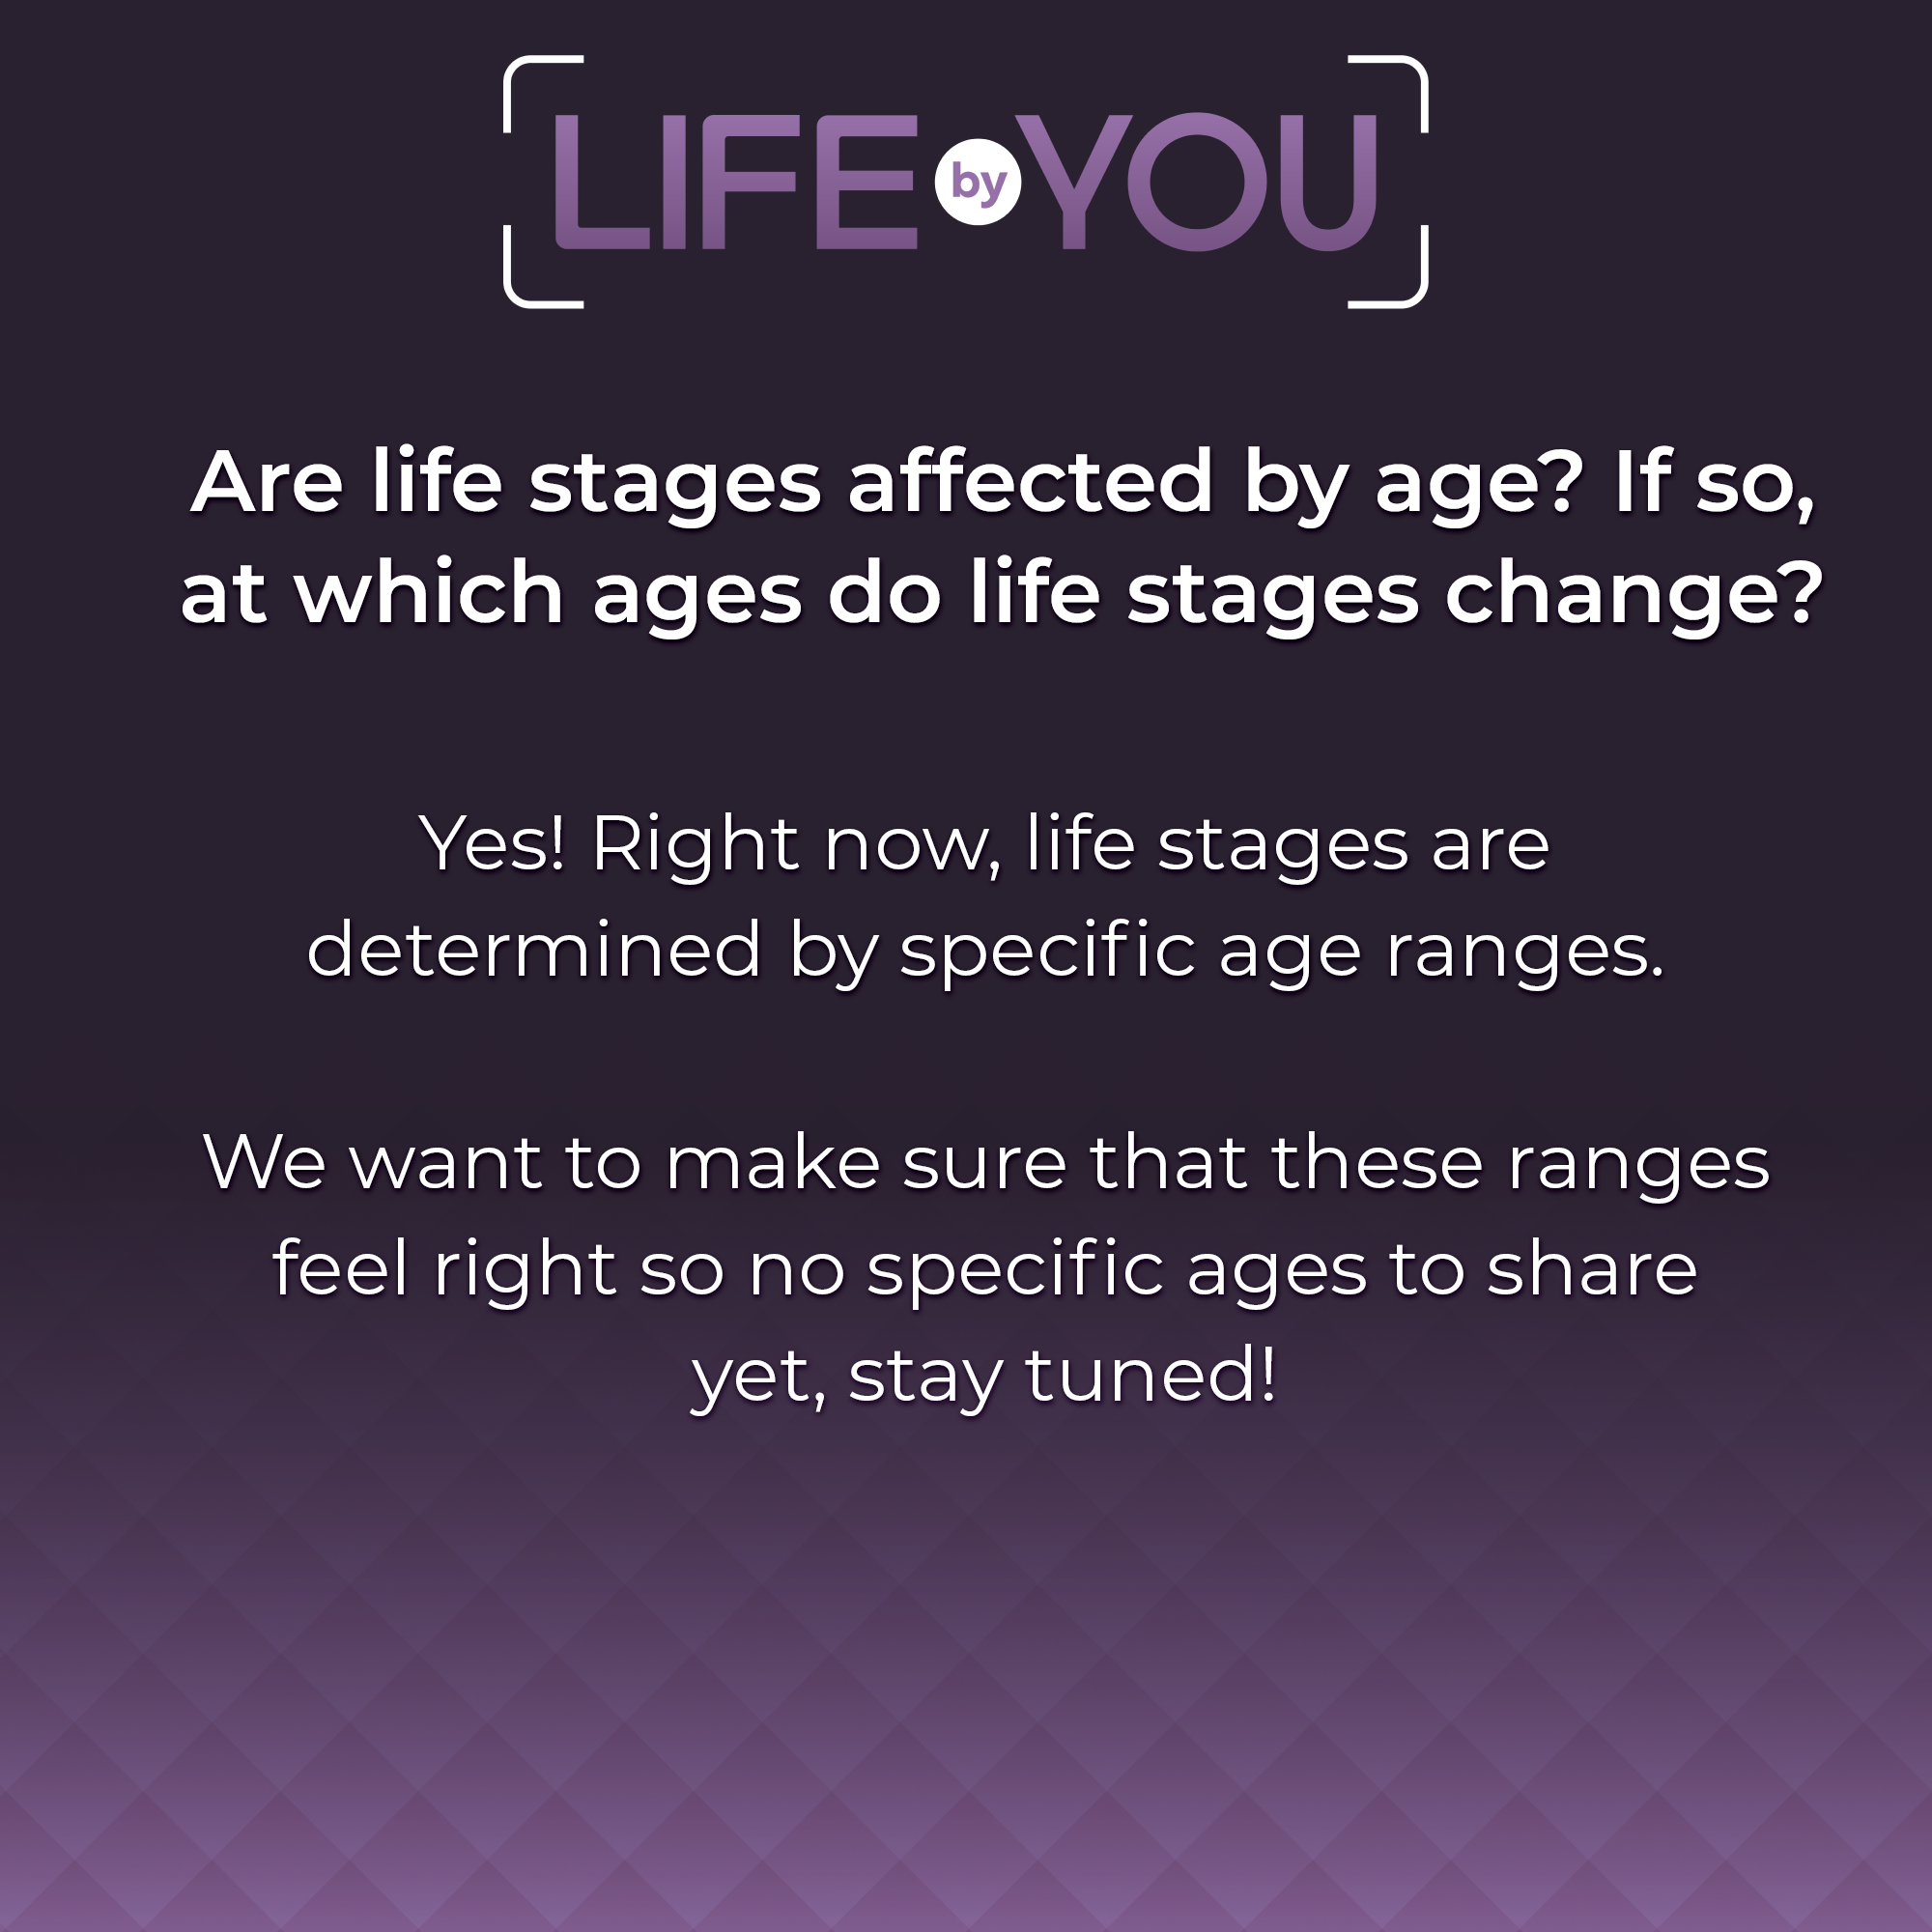 QnA Are life stages affected by age?